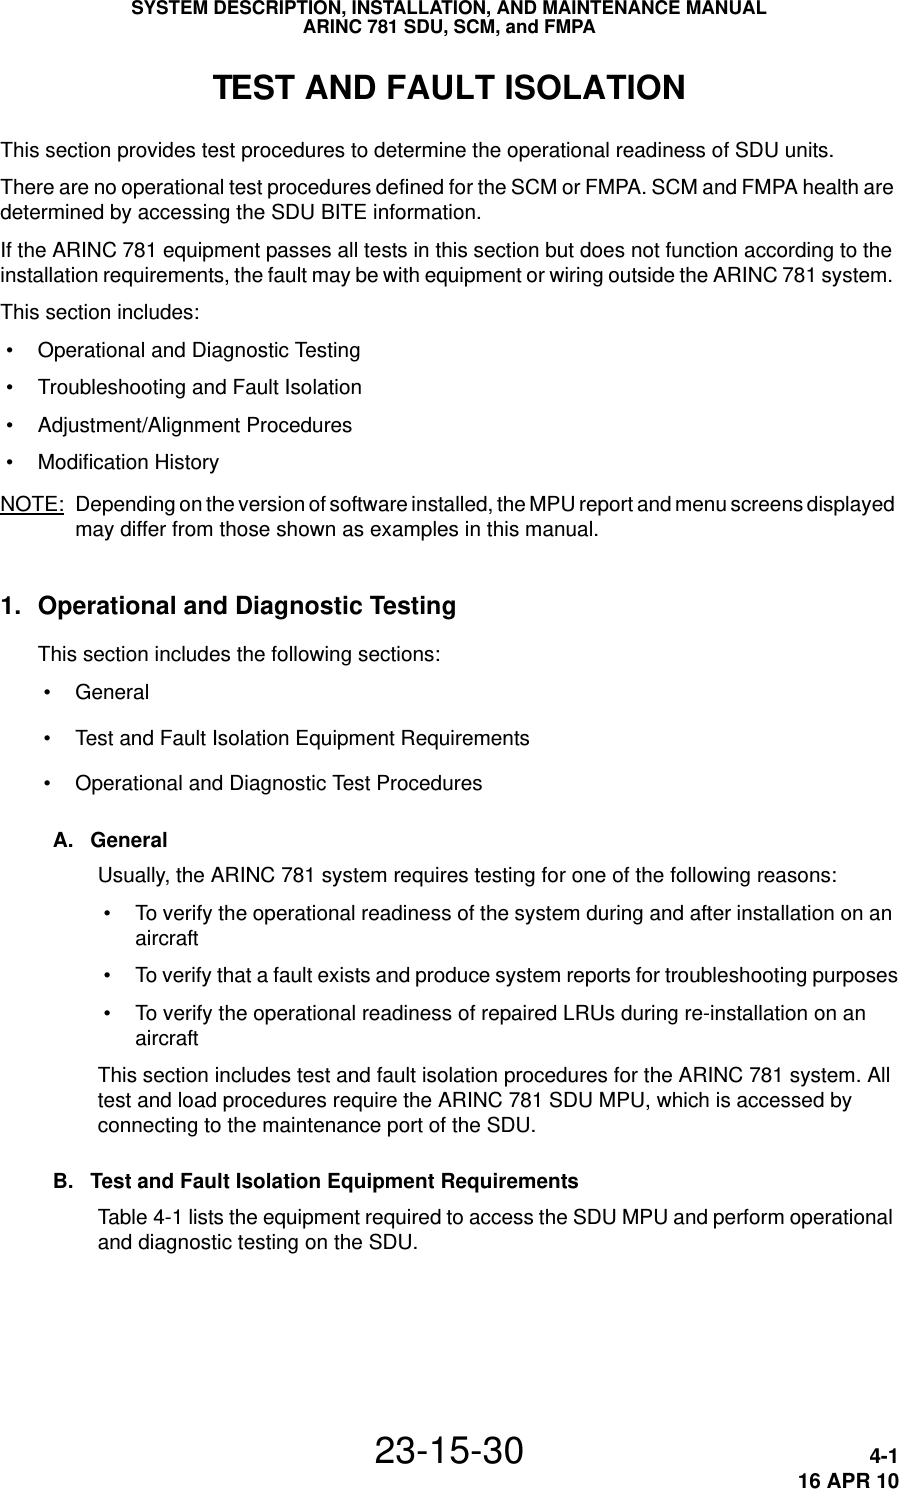 SYSTEM DESCRIPTION, INSTALLATION, AND MAINTENANCE MANUALARINC 781 SDU, SCM, and FMPA23-15-30 4-116 APR 10TEST AND FAULT ISOLATIONThis section provides test procedures to determine the operational readiness of SDU units. There are no operational test procedures defined for the SCM or FMPA. SCM and FMPA health are determined by accessing the SDU BITE information.If the ARINC 781 equipment passes all tests in this section but does not function according to the installation requirements, the fault may be with equipment or wiring outside the ARINC 781 system. This section includes: • Operational and Diagnostic Testing • Troubleshooting and Fault Isolation • Adjustment/Alignment Procedures • Modification History NOTE: Depending on the version of software installed, the MPU report and menu screens displayed may differ from those shown as examples in this manual.1. Operational and Diagnostic TestingThis section includes the following sections: • General • Test and Fault Isolation Equipment Requirements • Operational and Diagnostic Test ProceduresA. GeneralUsually, the ARINC 781 system requires testing for one of the following reasons: • To verify the operational readiness of the system during and after installation on an aircraft • To verify that a fault exists and produce system reports for troubleshooting purposes • To verify the operational readiness of repaired LRUs during re-installation on an aircraftThis section includes test and fault isolation procedures for the ARINC 781 system. All test and load procedures require the ARINC 781 SDU MPU, which is accessed by connecting to the maintenance port of the SDU. B. Test and Fault Isolation Equipment RequirementsTable 4-1 lists the equipment required to access the SDU MPU and perform operational and diagnostic testing on the SDU. 